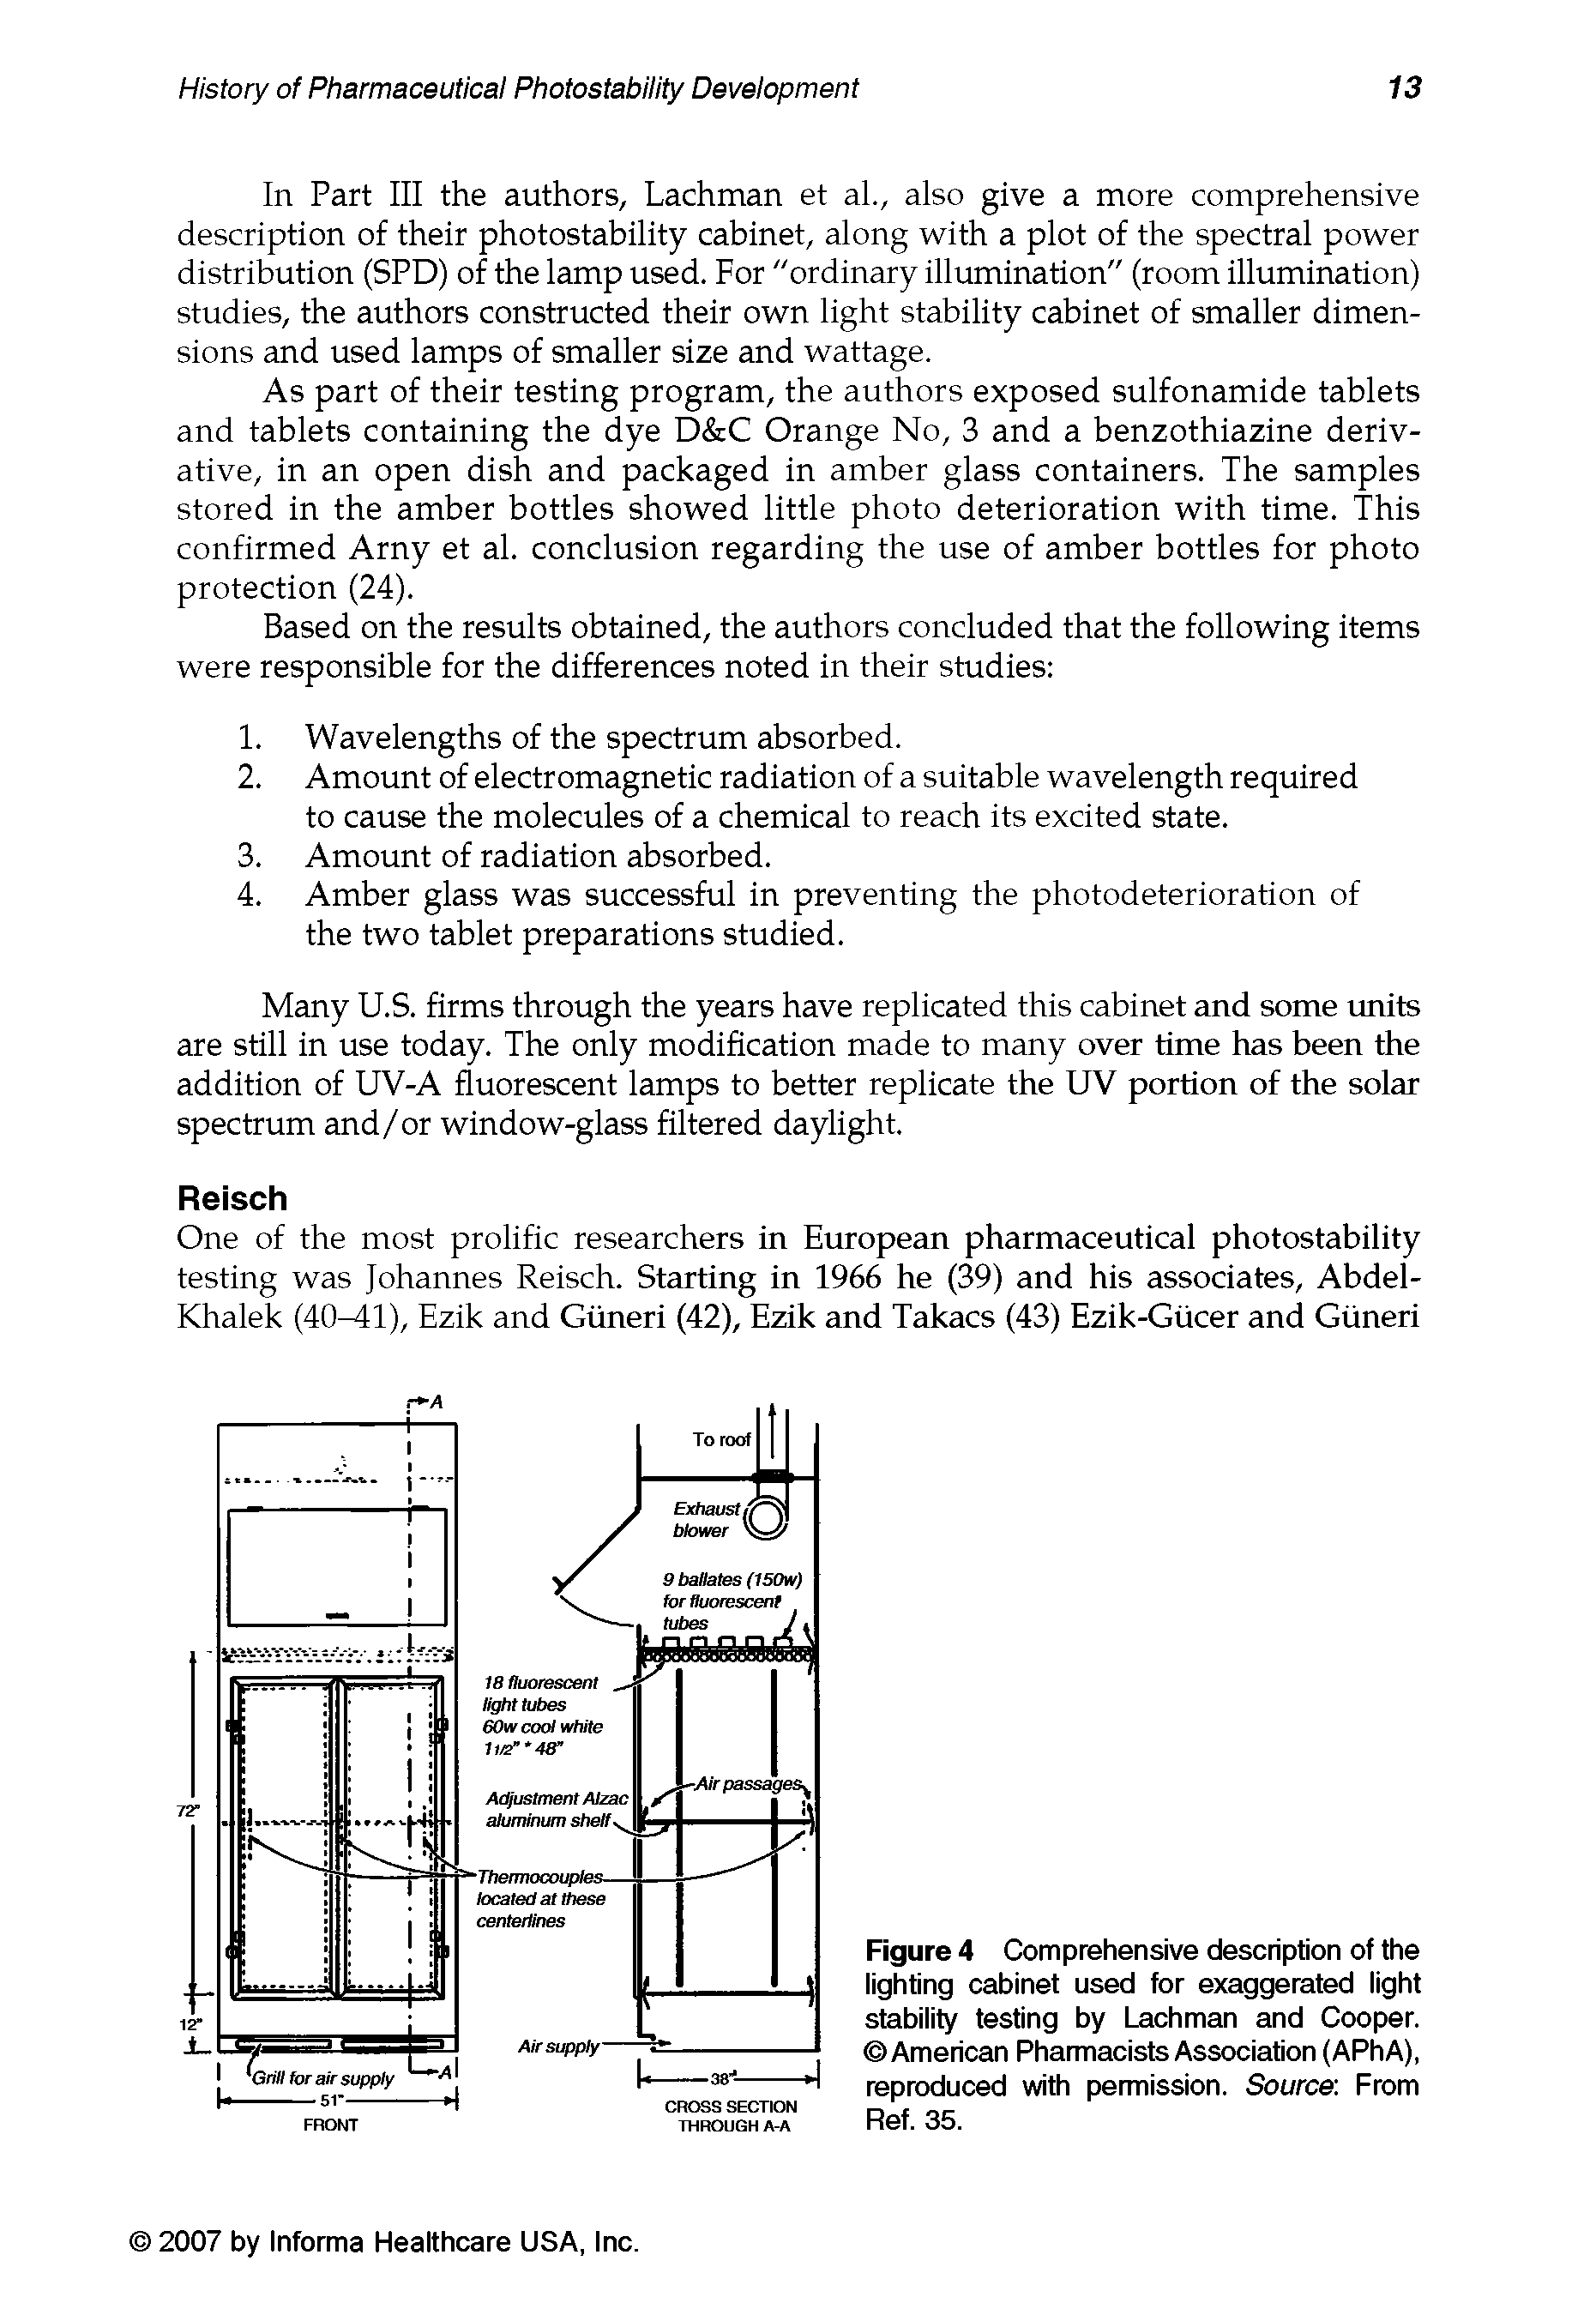 Figure 4 Comprehensive description of the lighting cabinet used for exaggerated light stability testing by Lachman and Cooper. American Pharmacists Association (APhA), reproduced with permission. Source From Ref. 35.